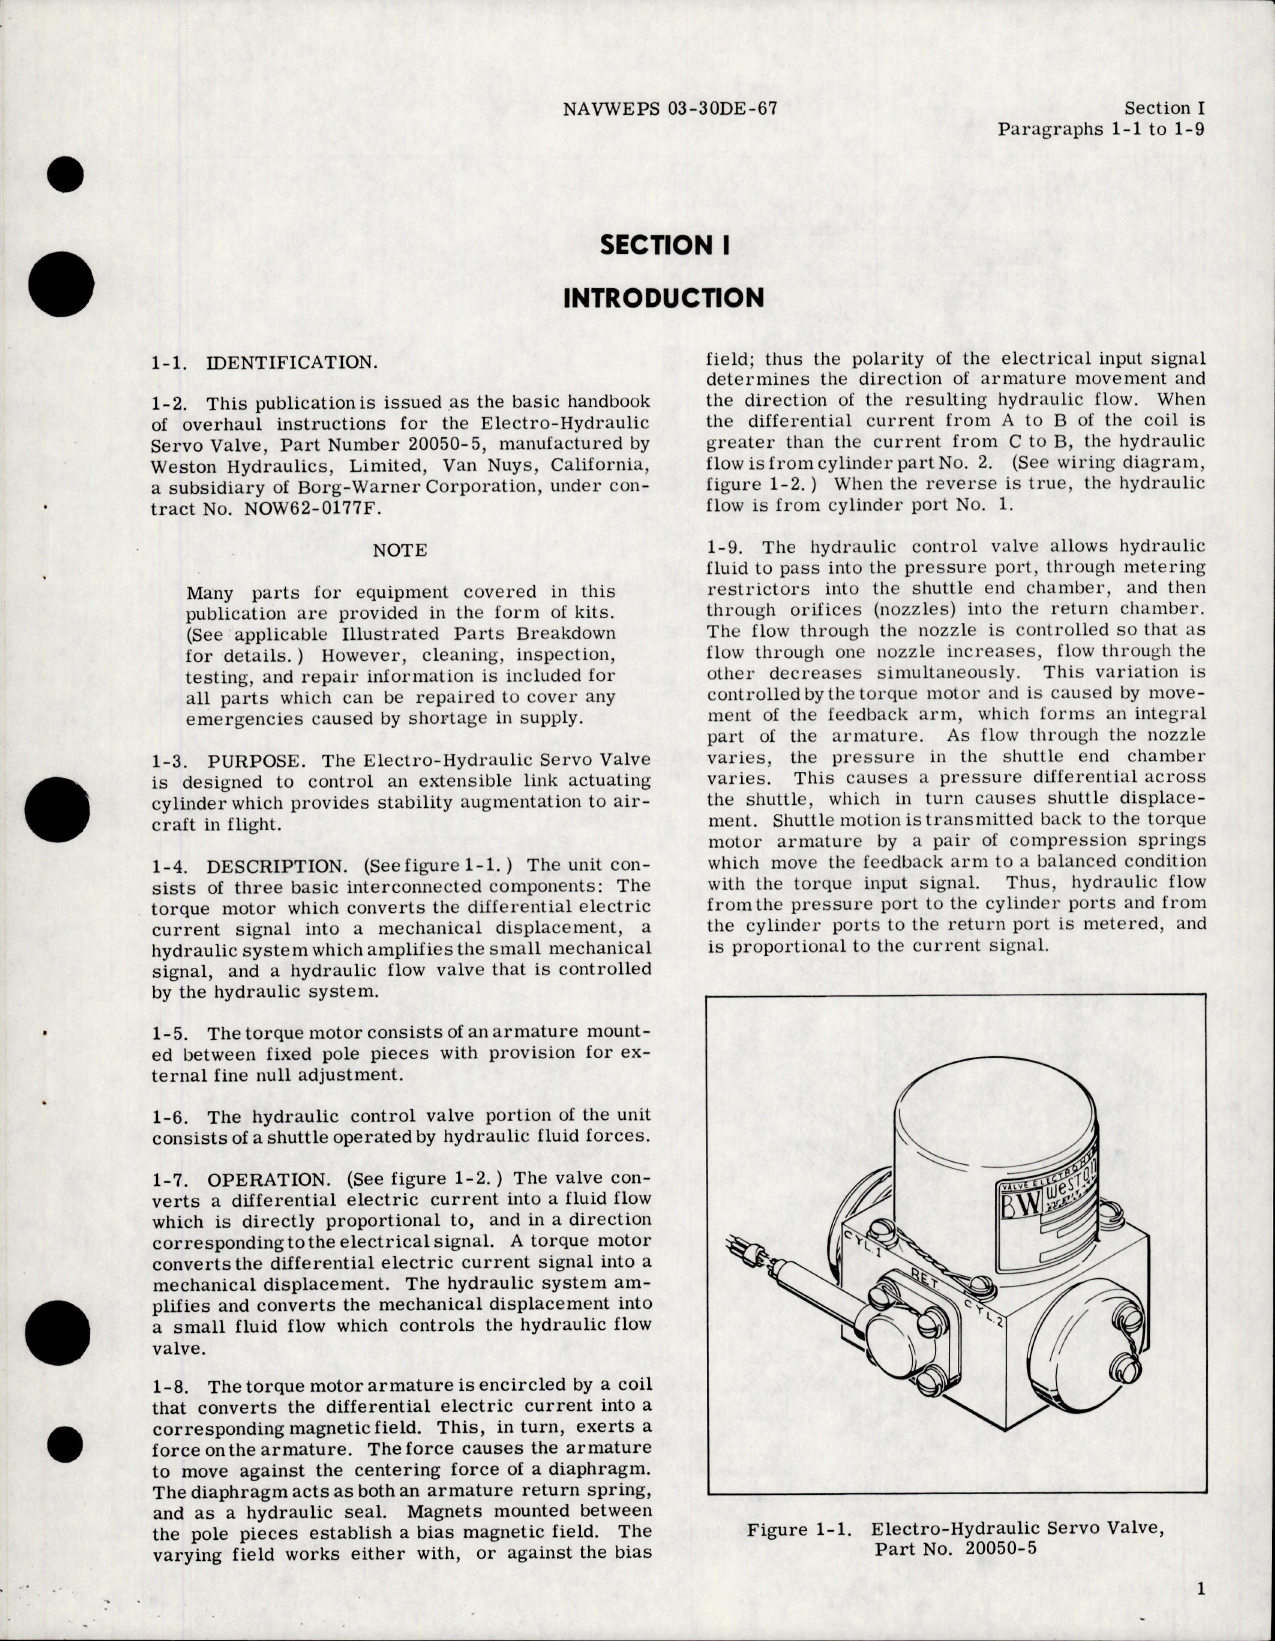 Sample page 5 from AirCorps Library document: Overhaul Instructions for Electro Hydraulic Servo Valve - Part 20050-5 